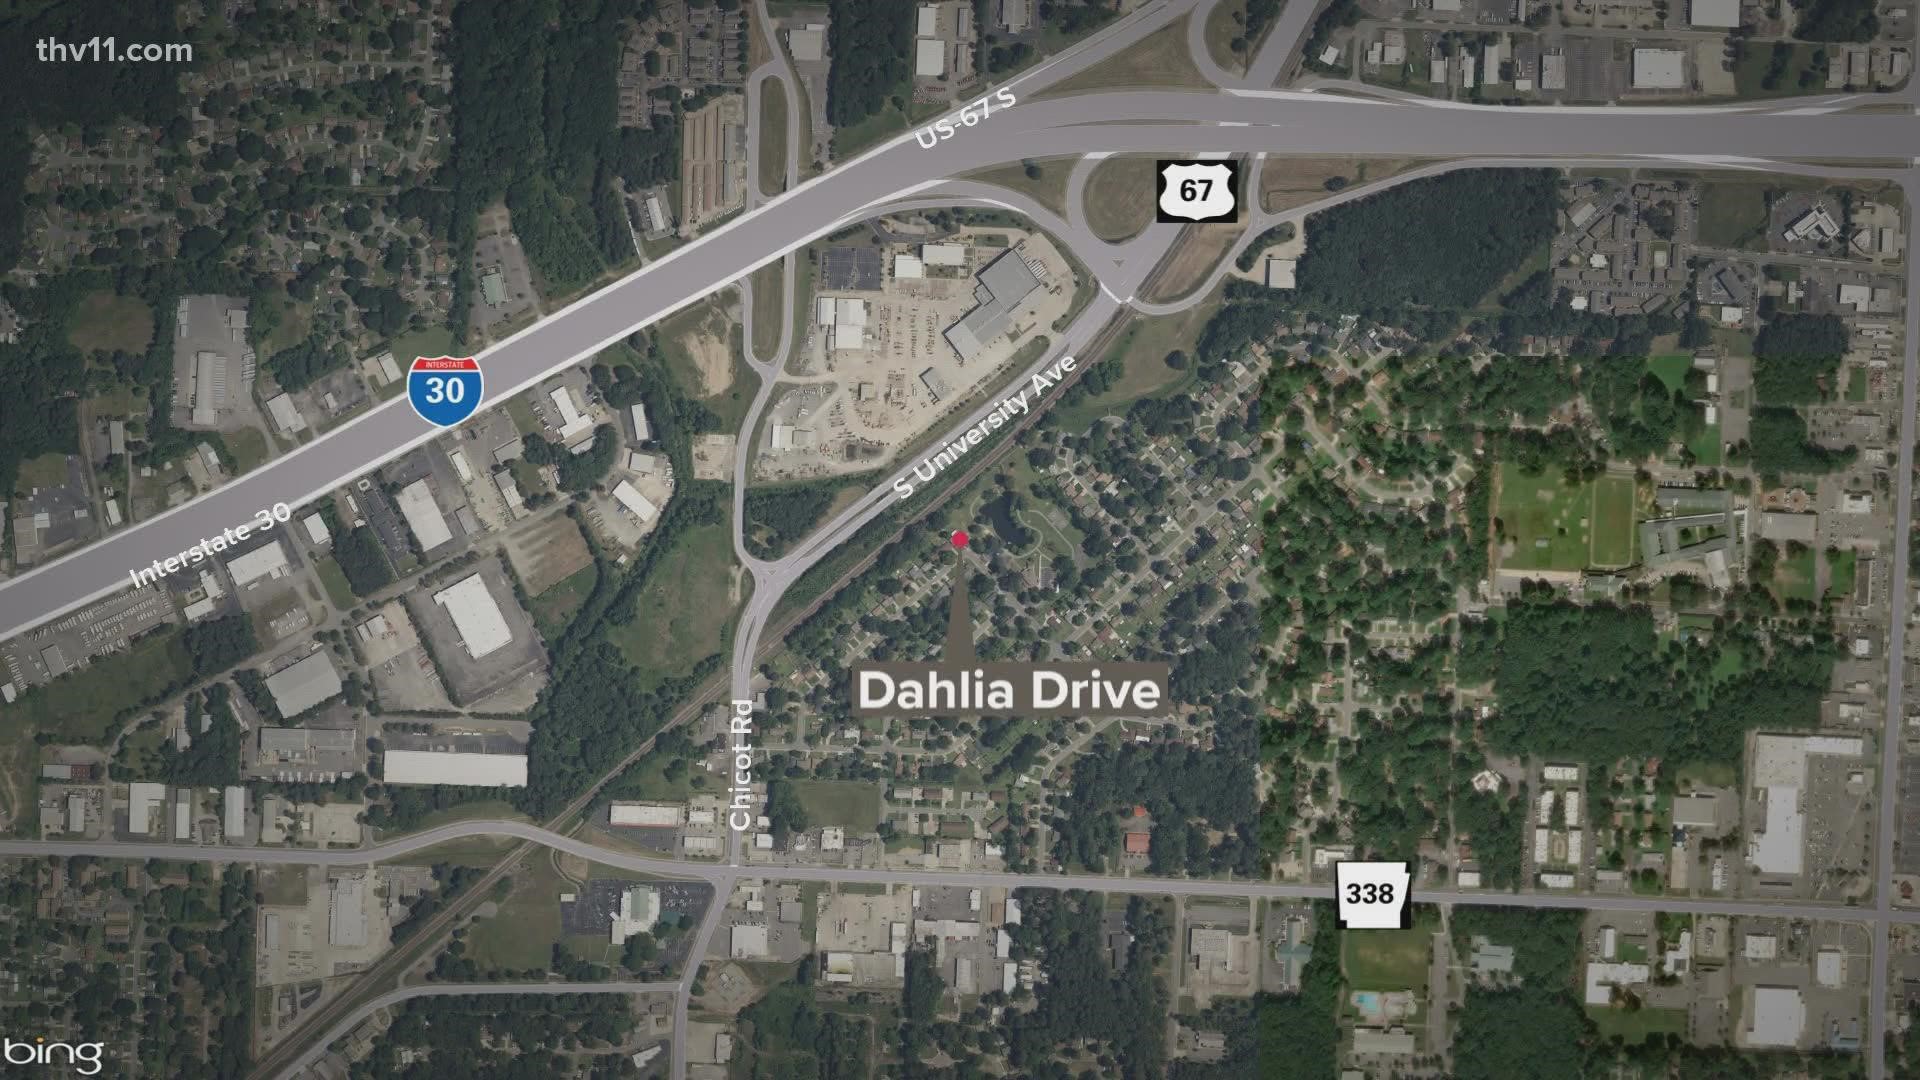 The Little Rock Police Department is now investigating a homicide that happened on Dahlia Drive.